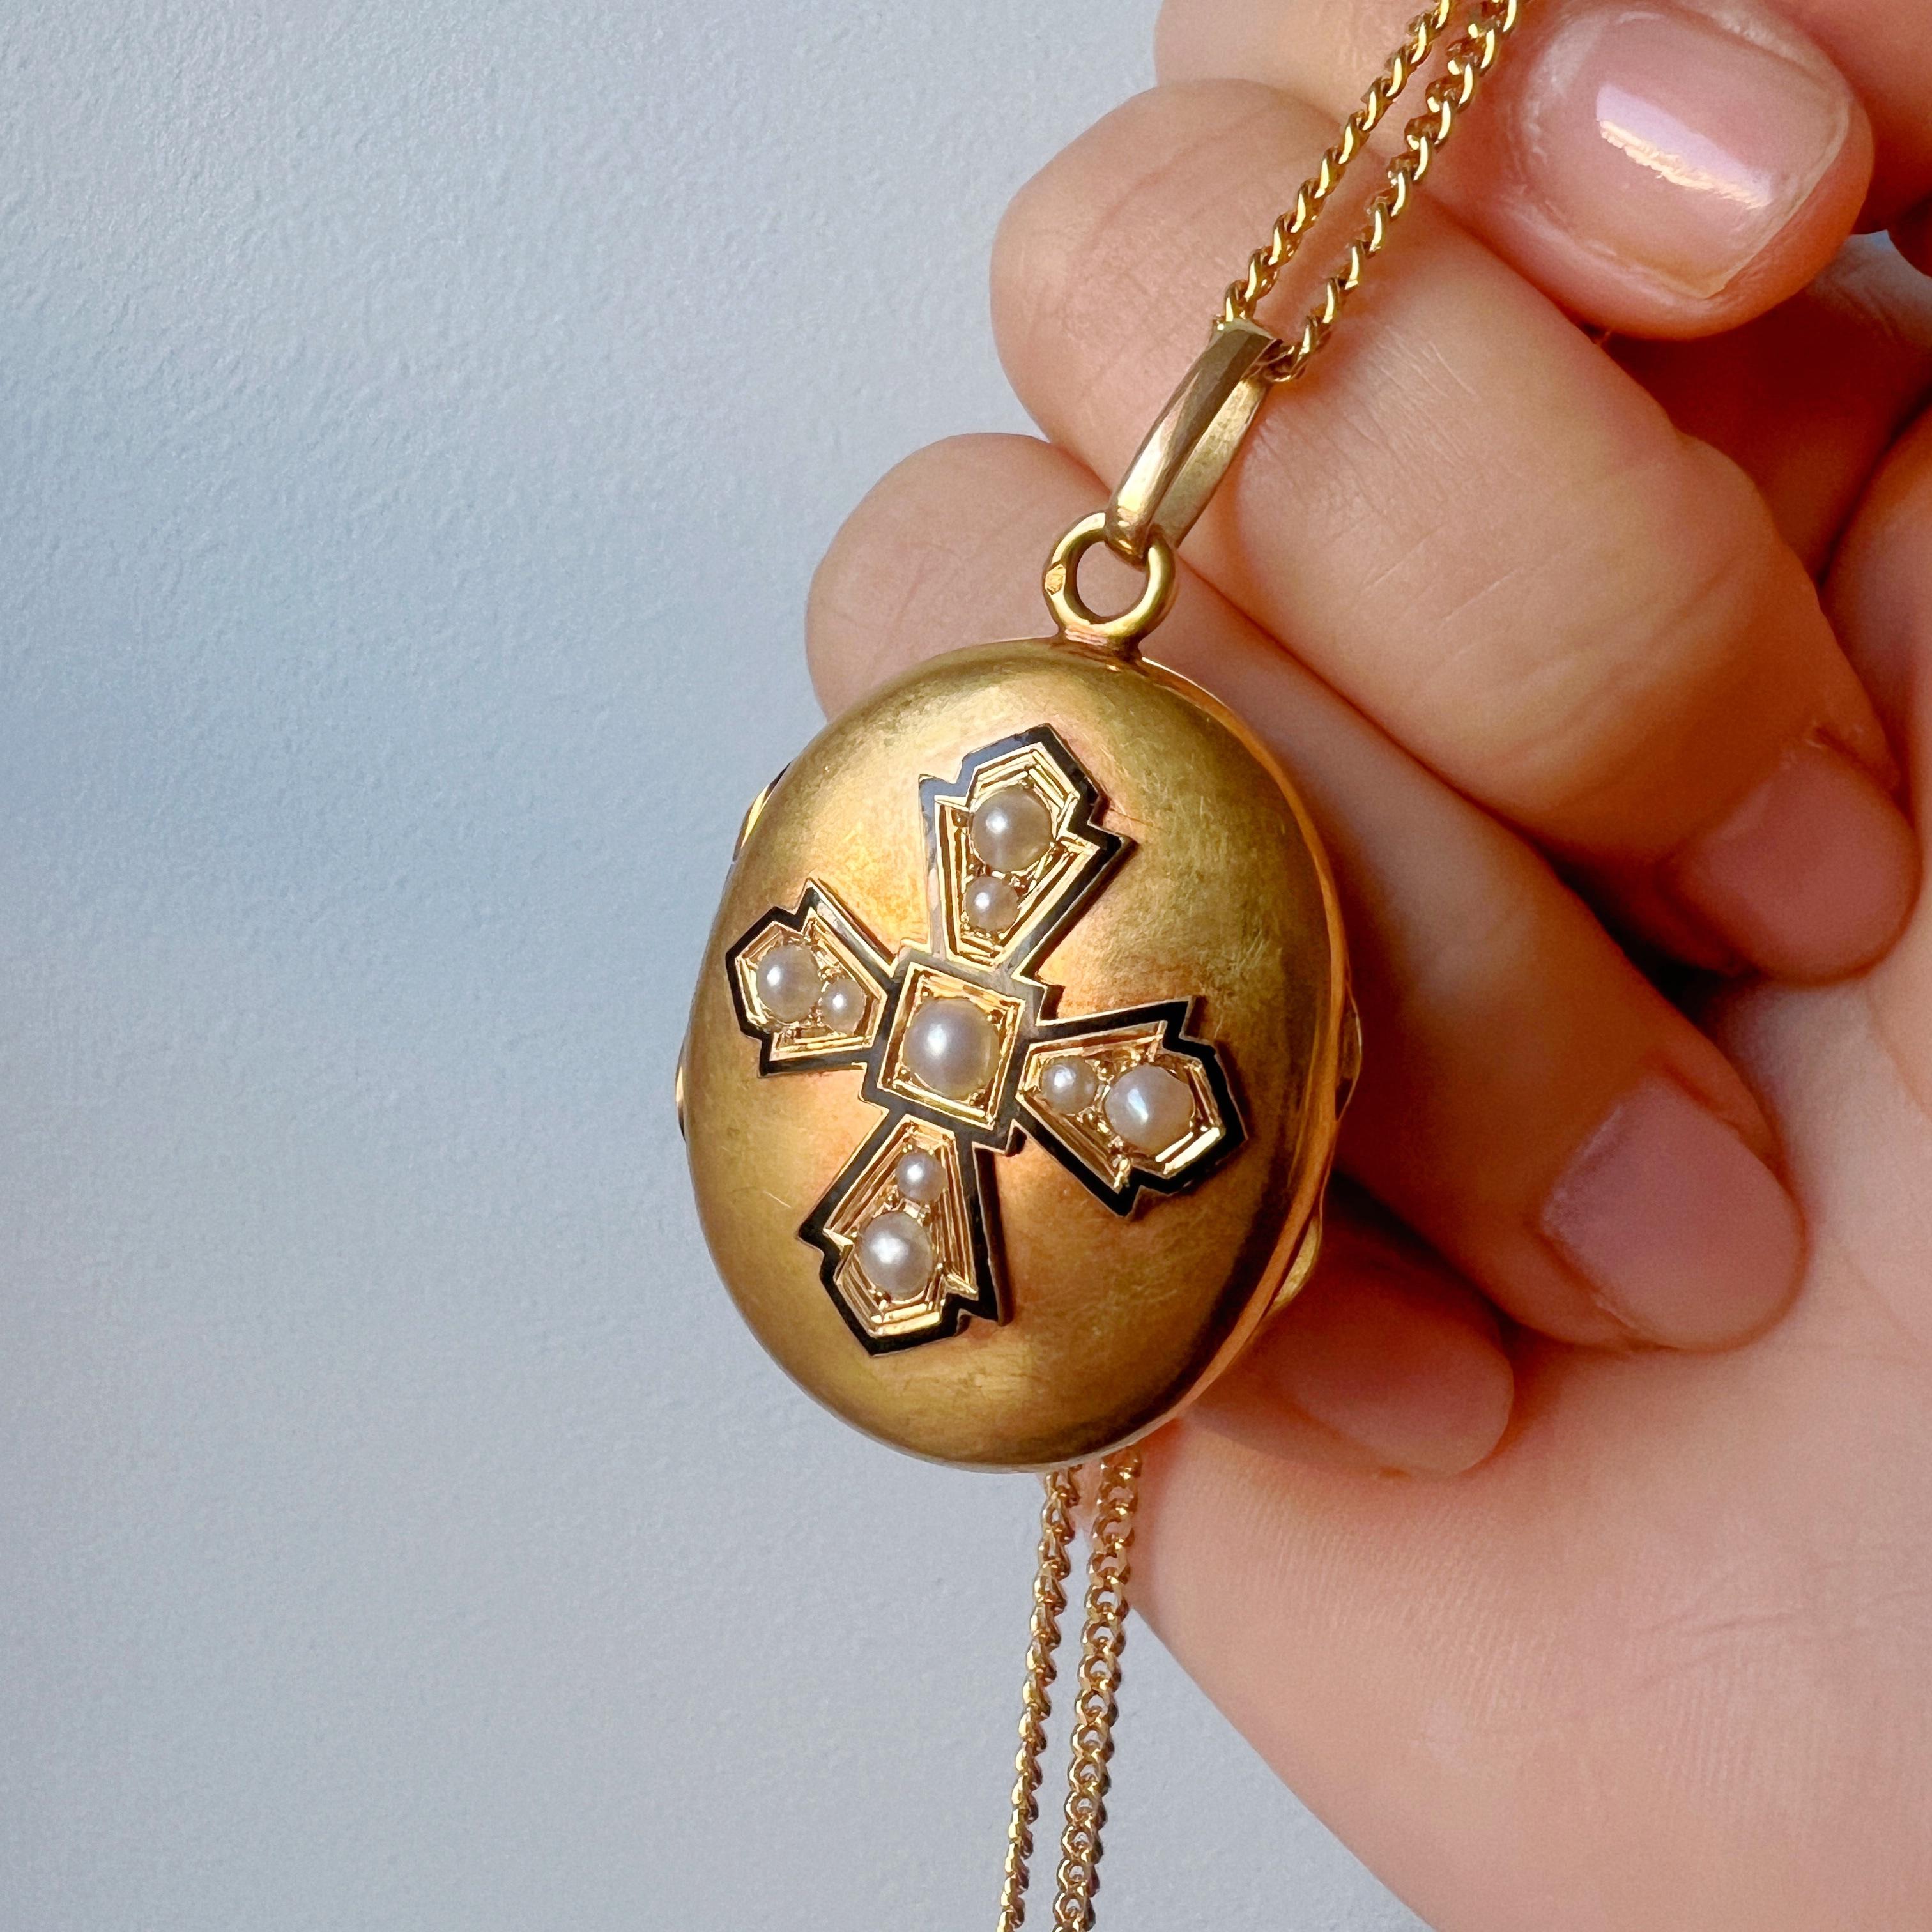 For sale a magnificent French work, Victorian era 18K gold locket pendant.

The front of the locket is adorned with a meticulously crafted black enamel cross, a symbol of faith, hope and benediction. Surrounding the cross are nine white half-pearls